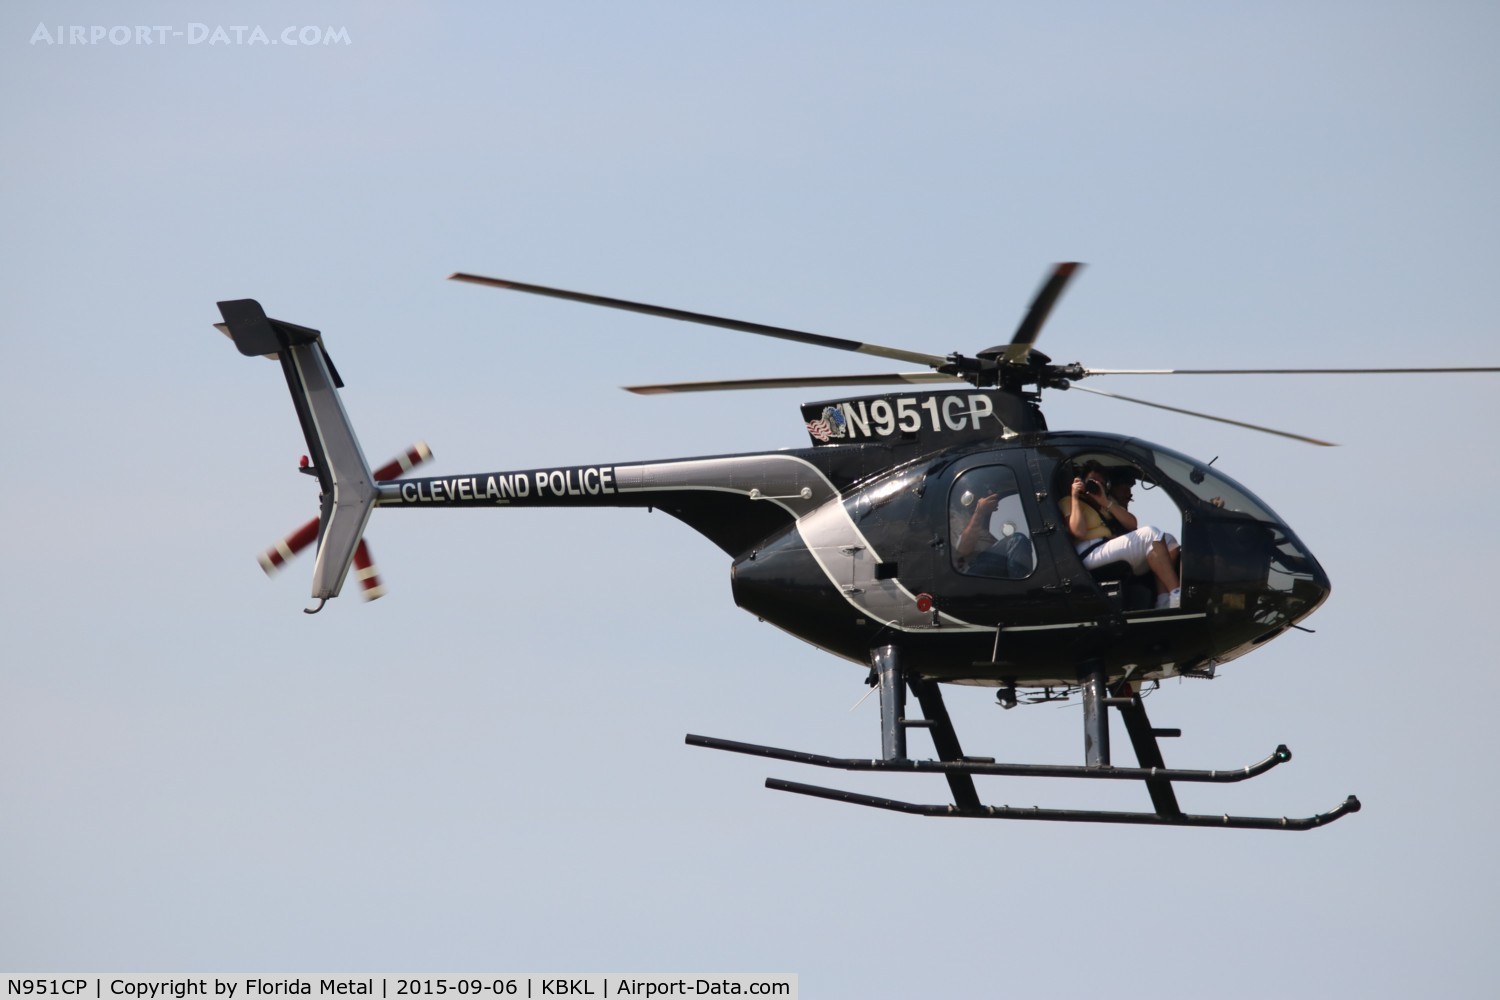 N951CP, 2000 MD Helicopters 369E C/N 0549E, Cleveland Airshow 2015